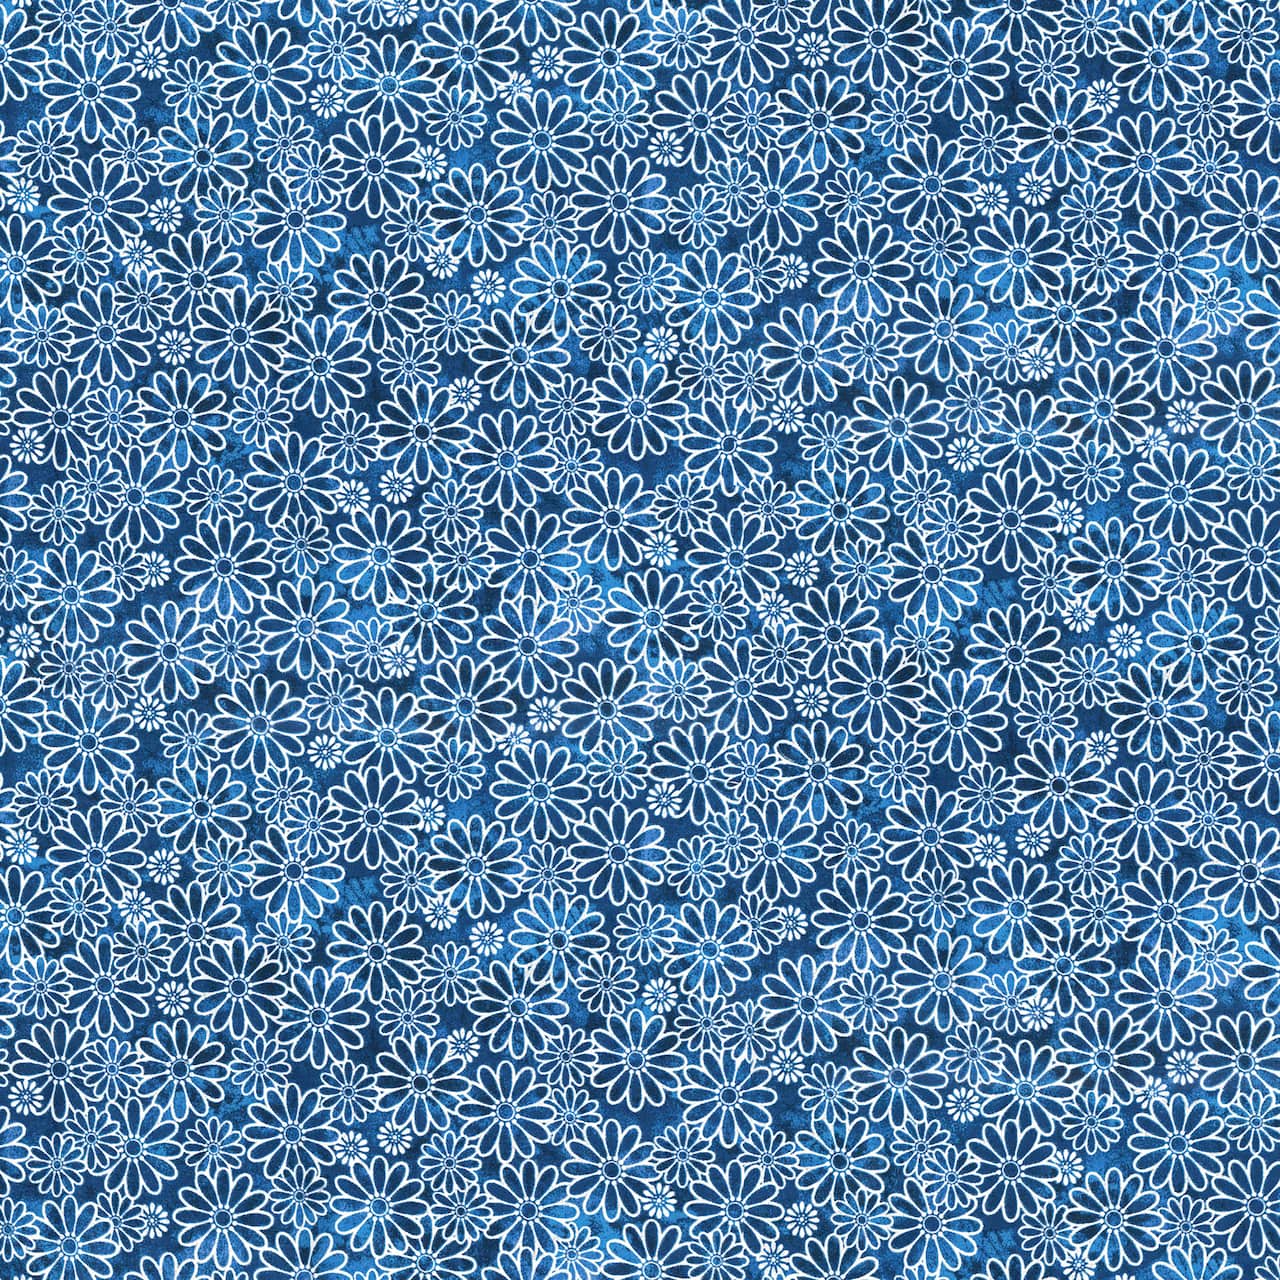 Fabric Traditions Blue Tonal Daisies Cotton Fabric